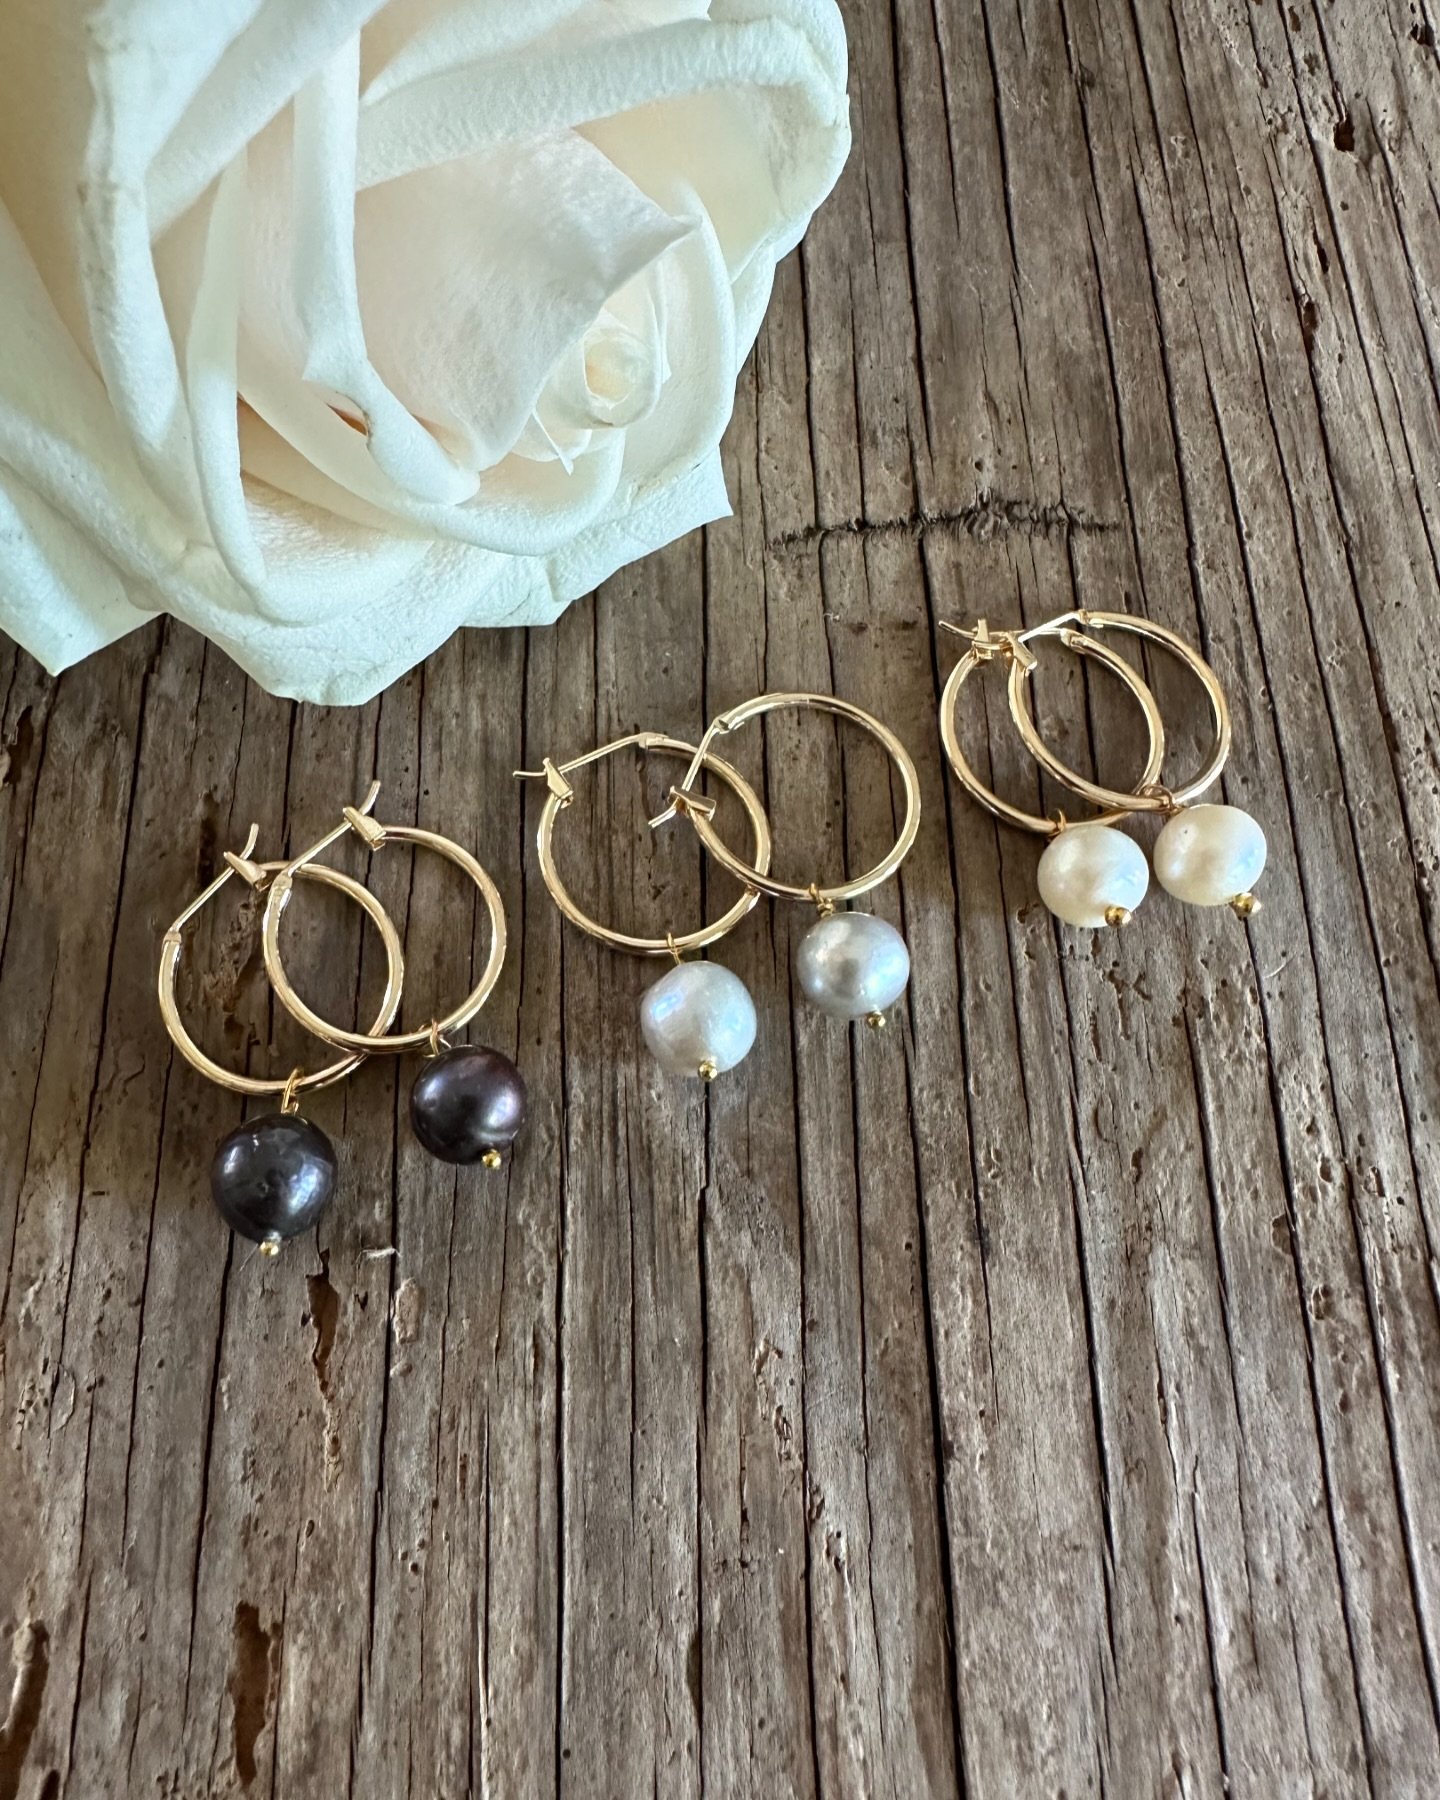 The perfect gift for Mother&rsquo;s Day🐚
&bull;
&bull;
&bull;
#pearlearrings #hoopearrings #goldhoopearrings #mothersdaygift